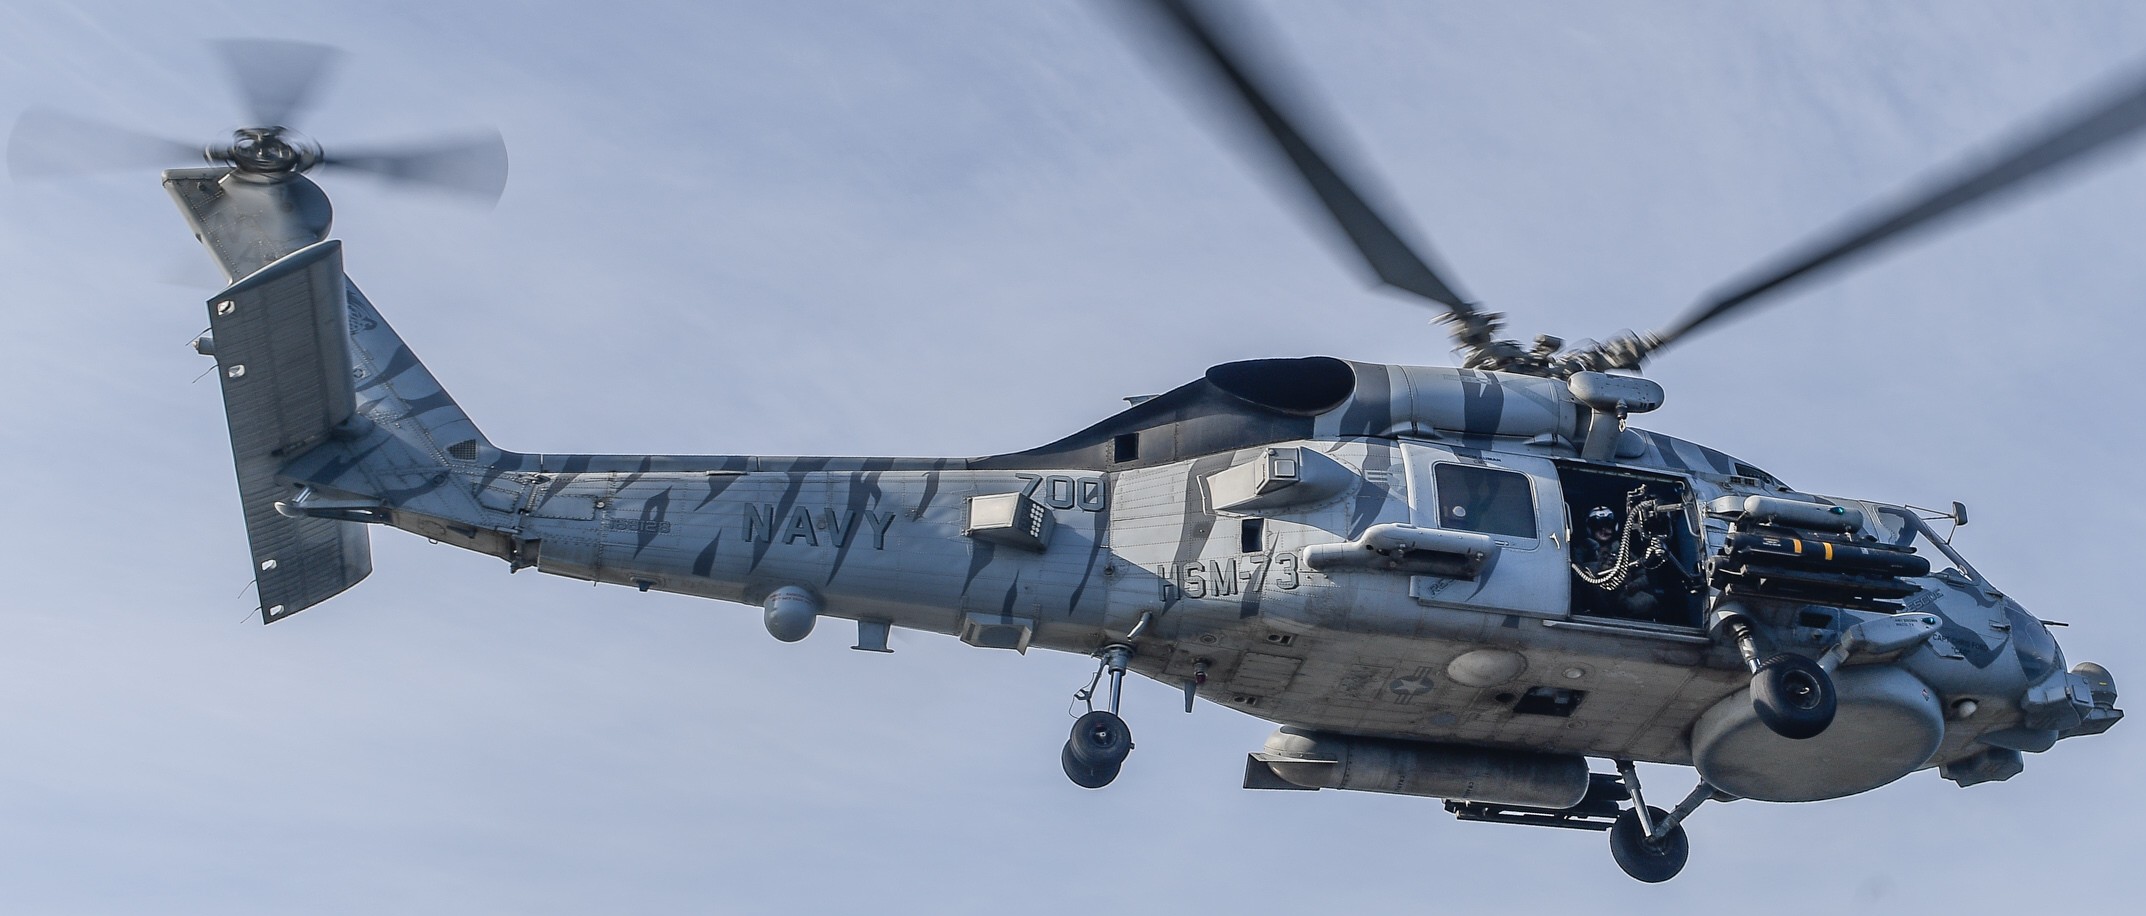 hsm-73 battlecats helicopter maritime strike squadron us navy mh-60r seahawk 2014 15